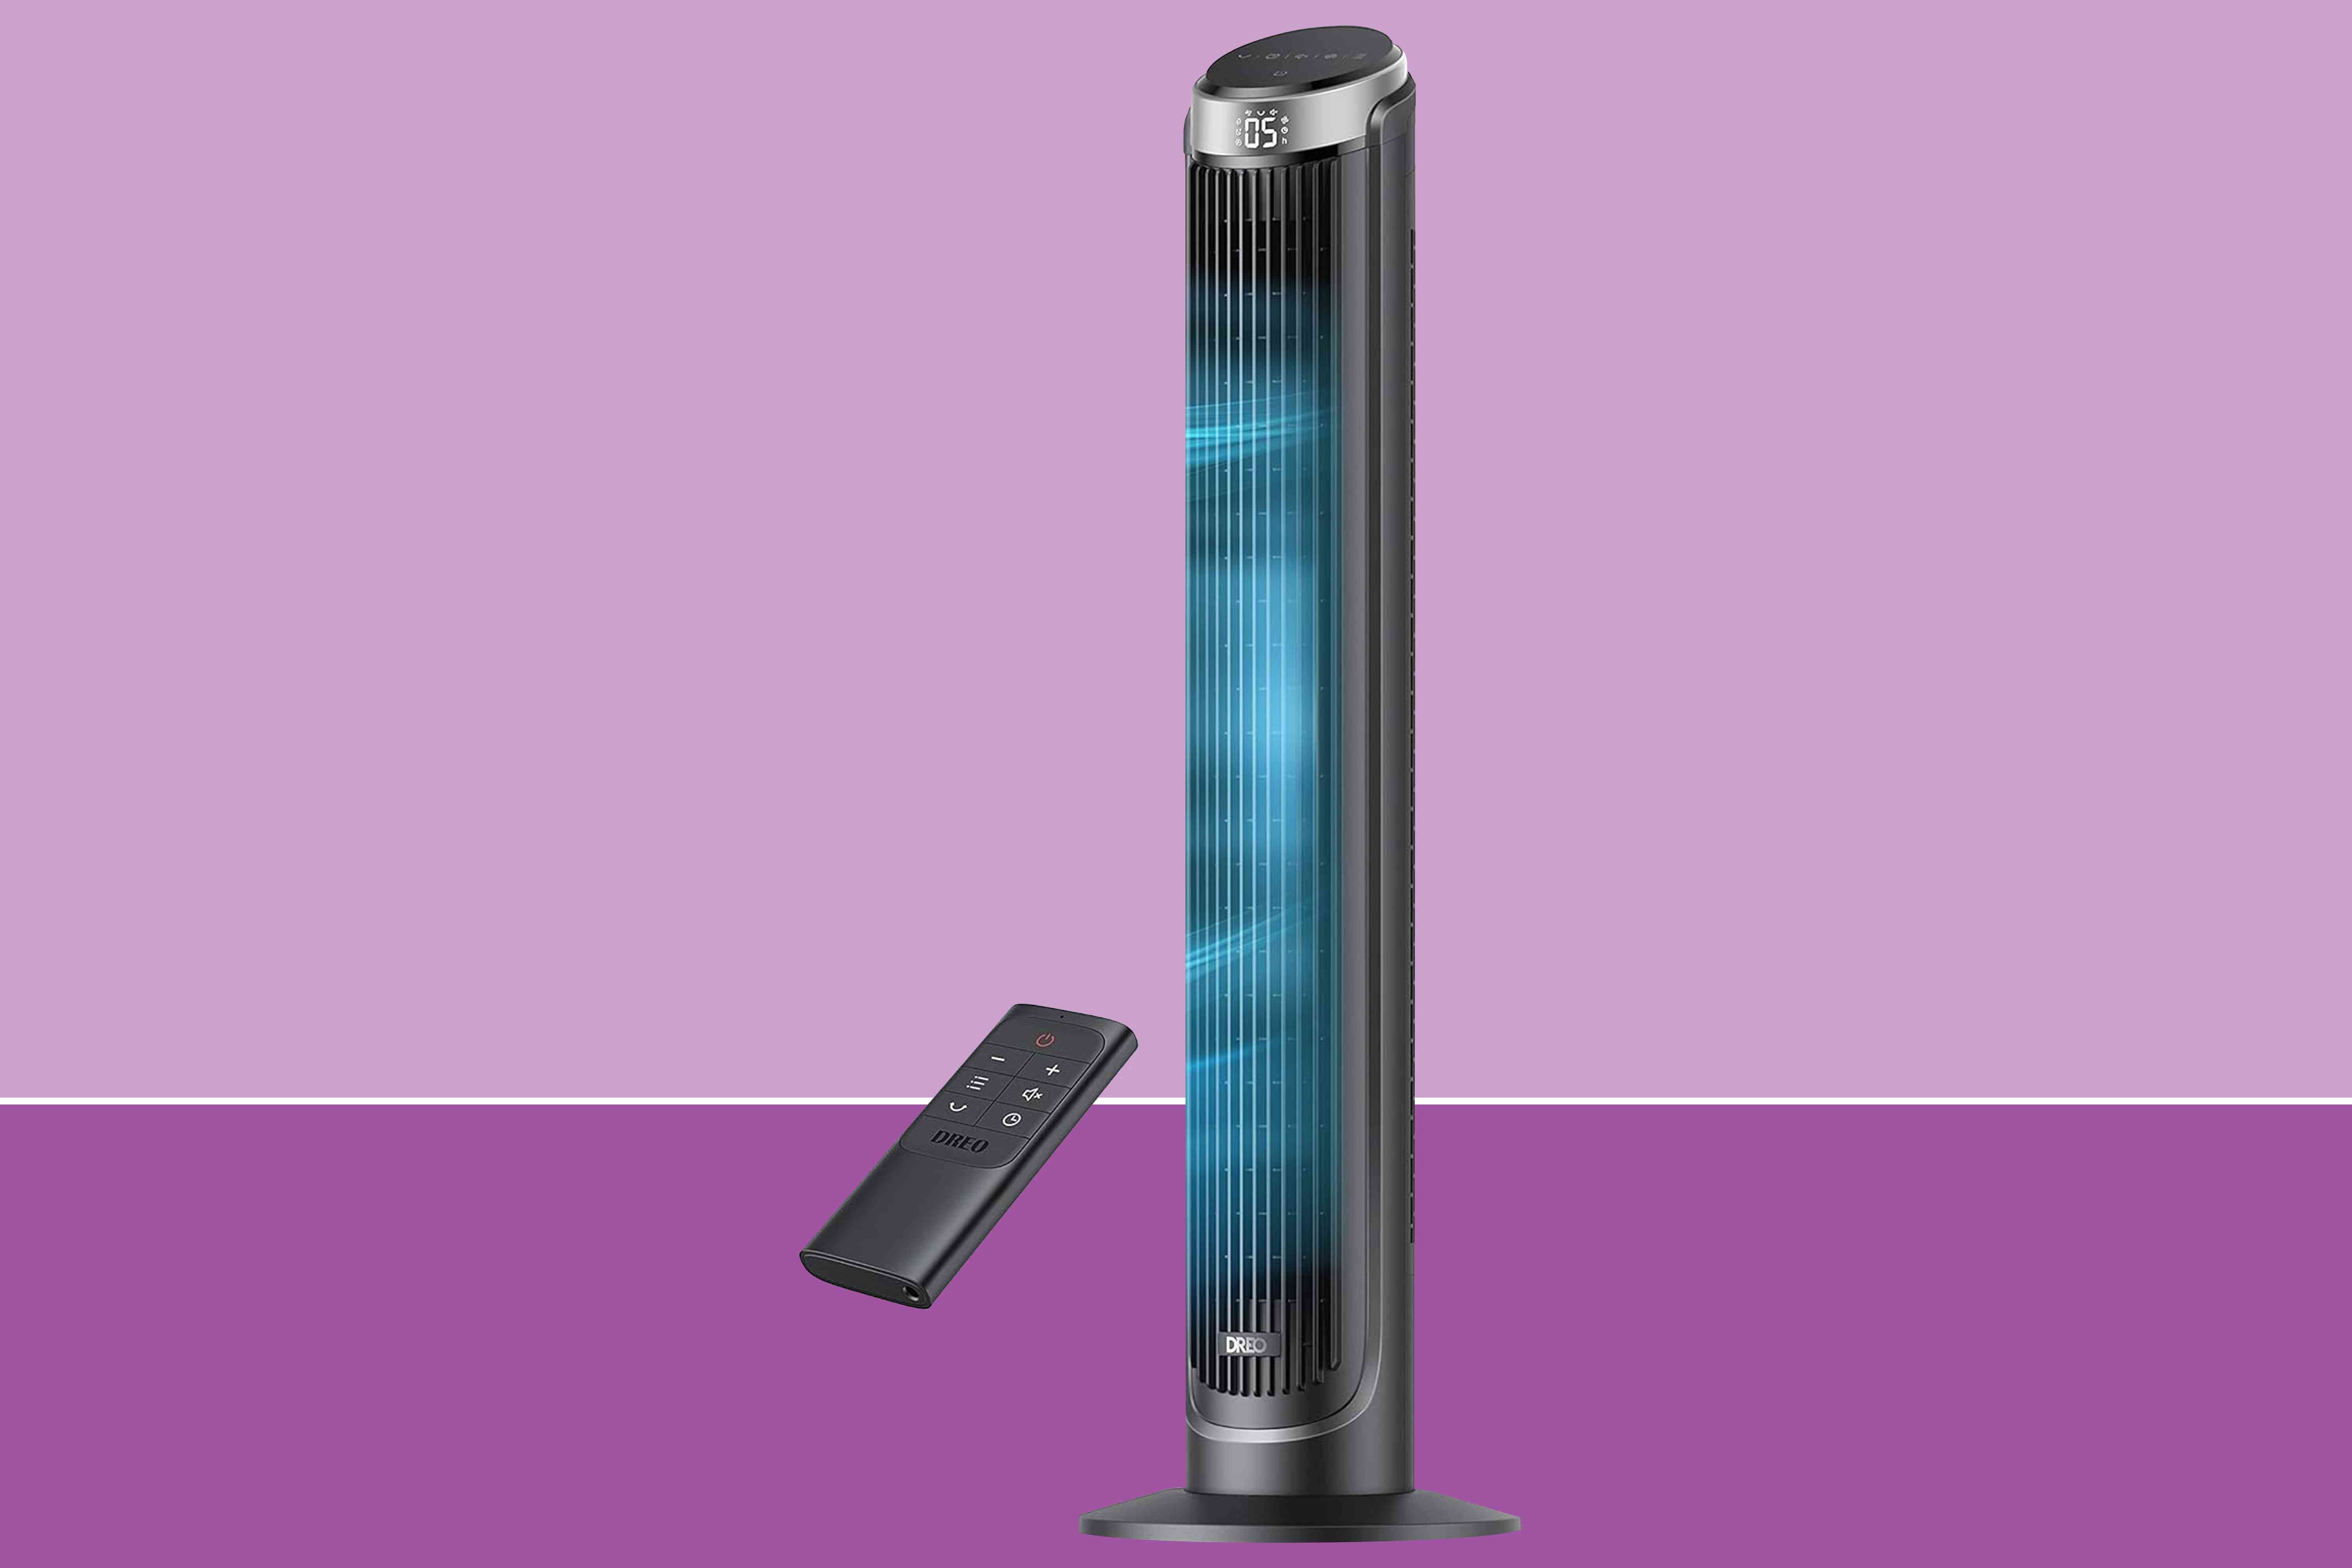 Over 7,000 Shoppers Just Snagged This Tower Fan That ‘Cranks Out Cold Air’ — and It’s on Sale at Amazon